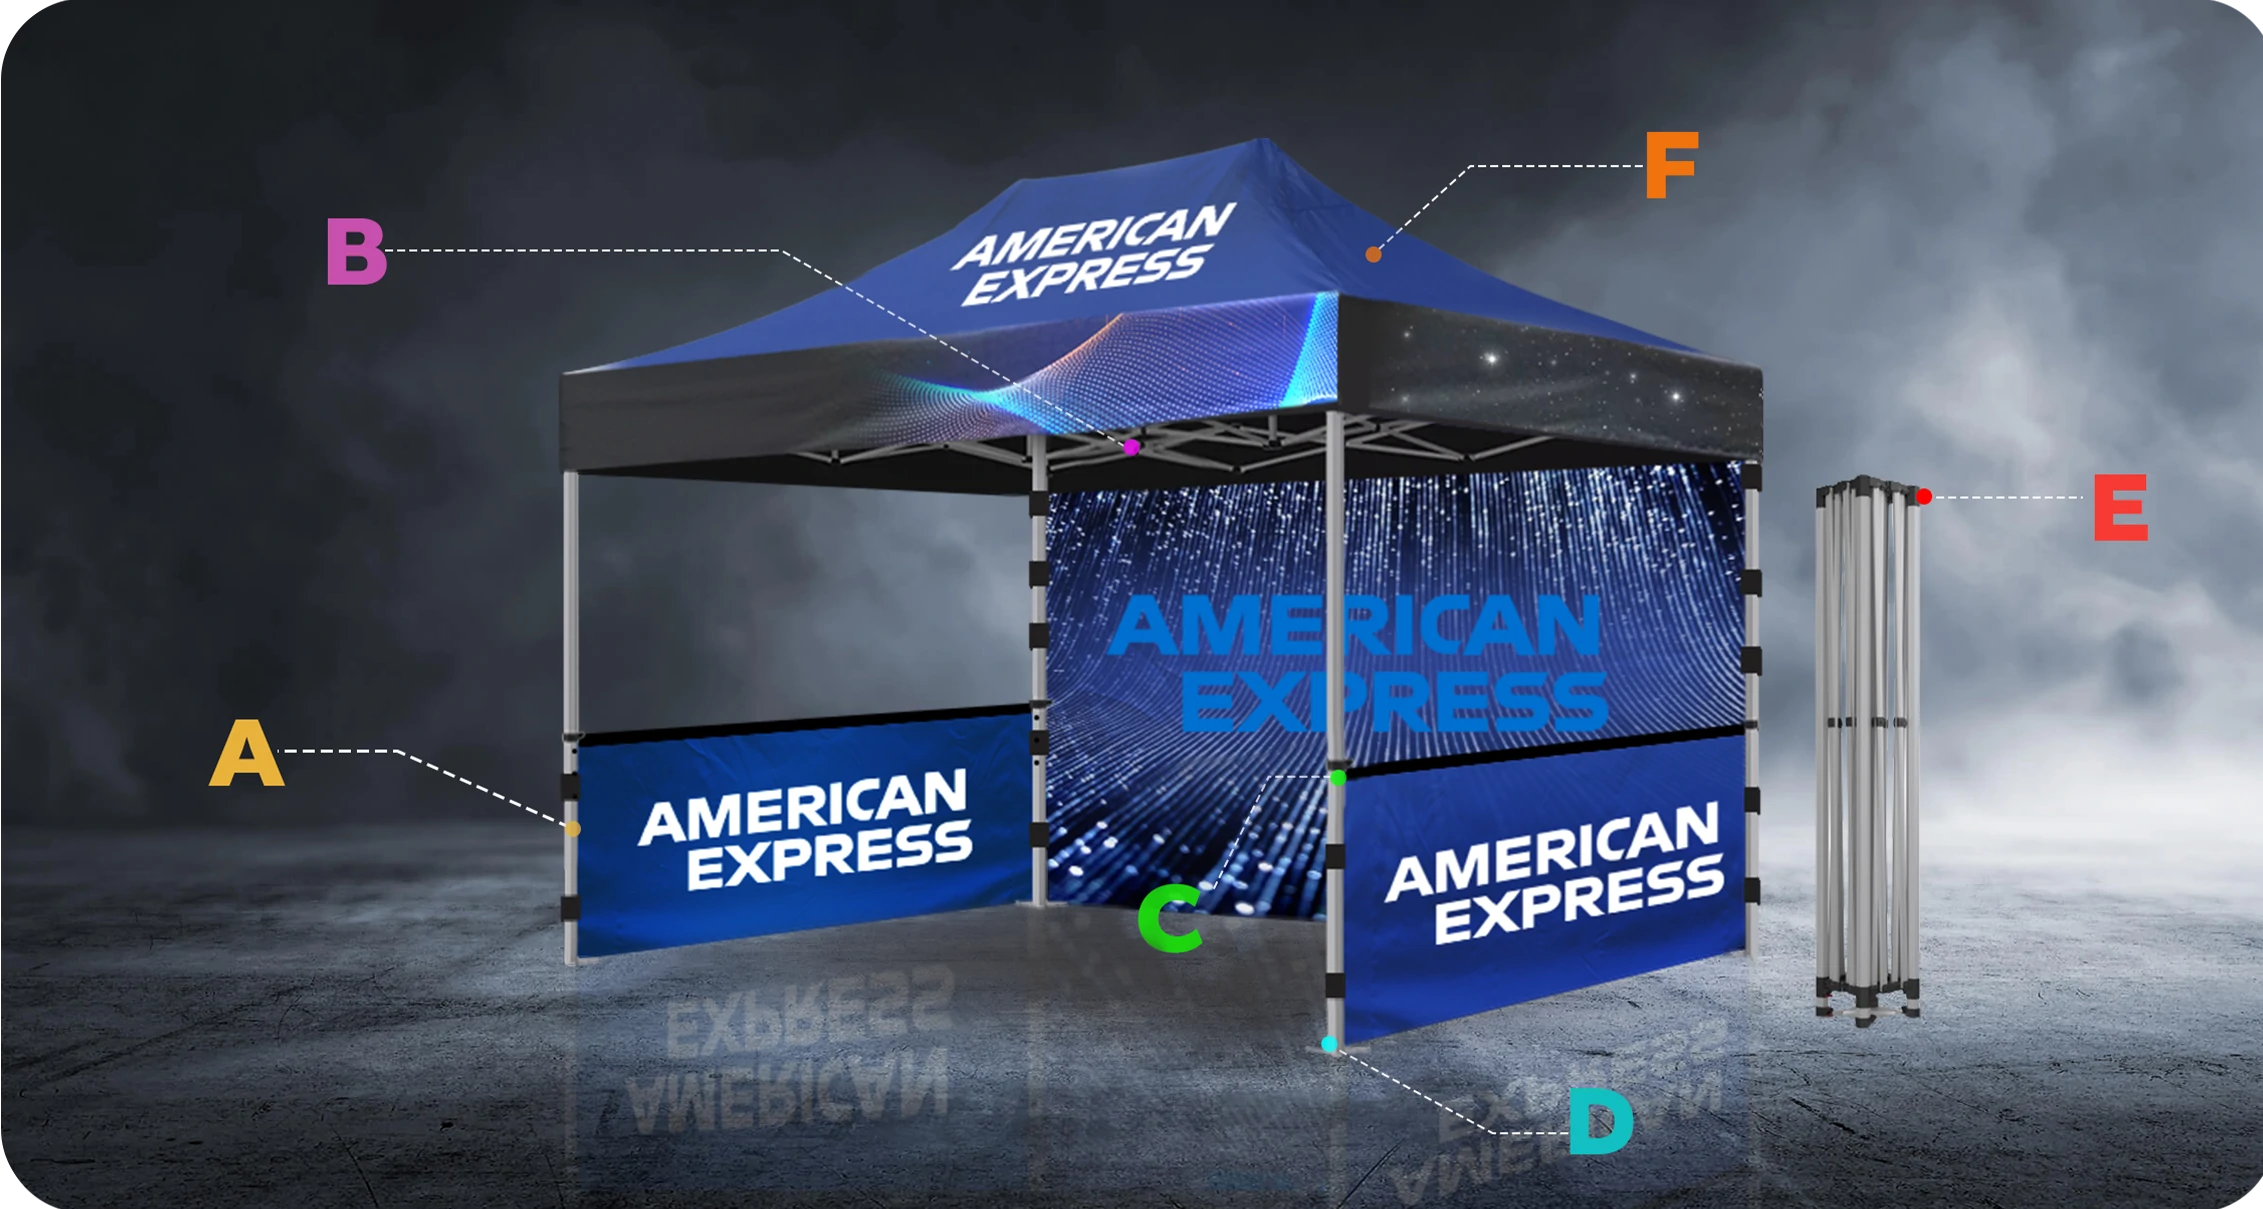 Why choose our Commercial High Peak Star Tents? They are designed for easy setup and takedown, allowing for efficient event planning and management. Their modular design also allows for customization options, including branding and signage integration, to align with your event theme or corporate identity.